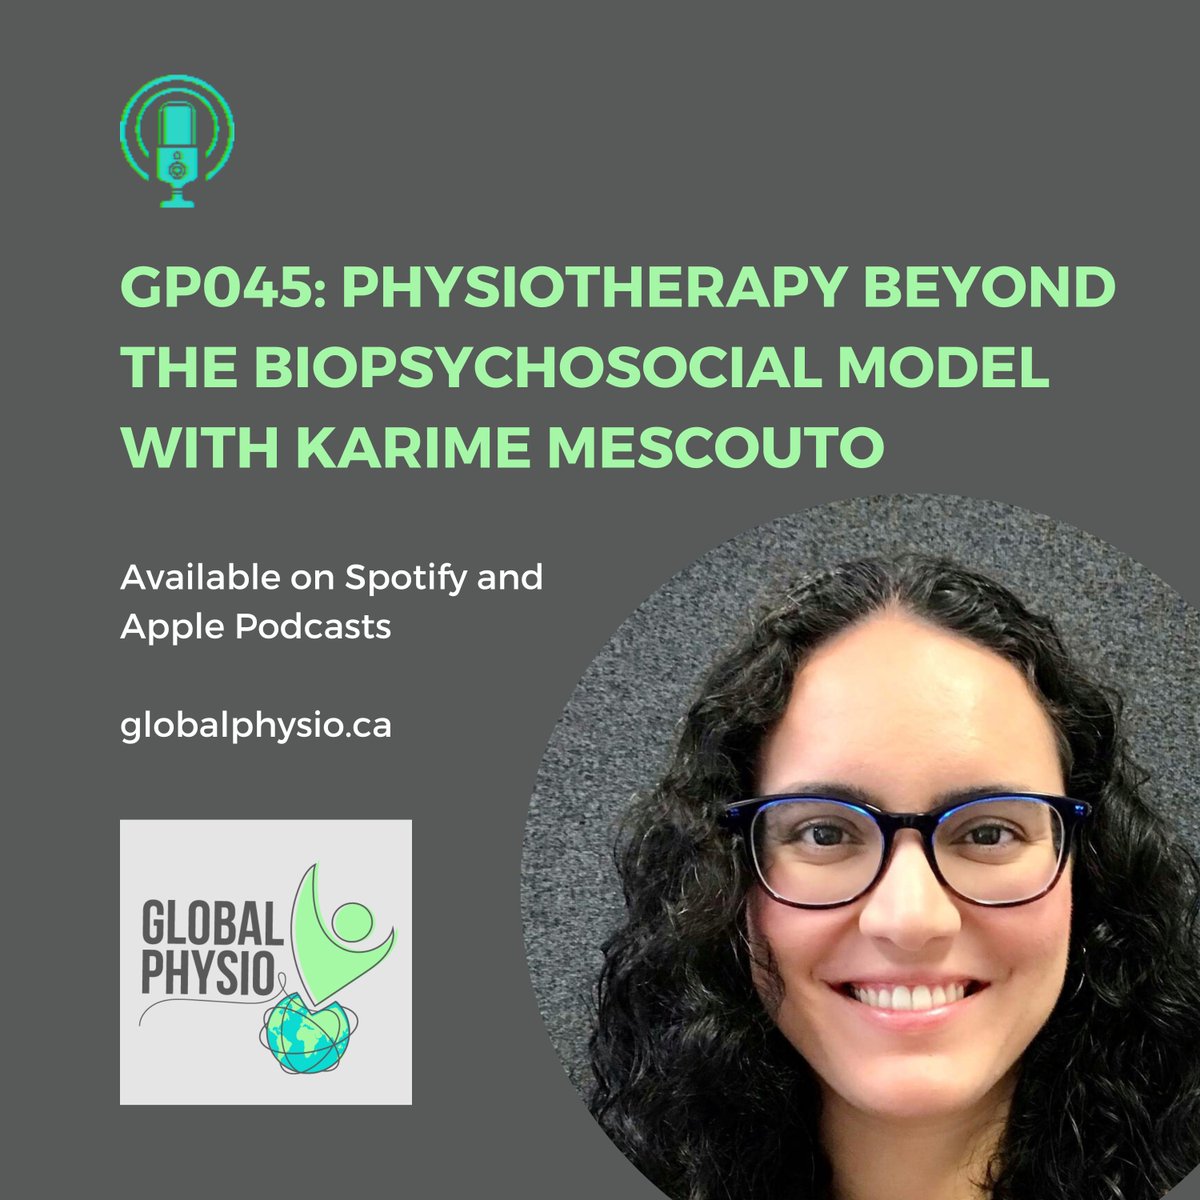 Latest episode with @KarimeMescouto and her work critically looking beyond the biopsychosocial model in physio. Conversations about multiplicity and the need to integrate cultural and social aspects within physio towards more equitable and inclusive care. open.spotify.com/episode/6y80Kk…